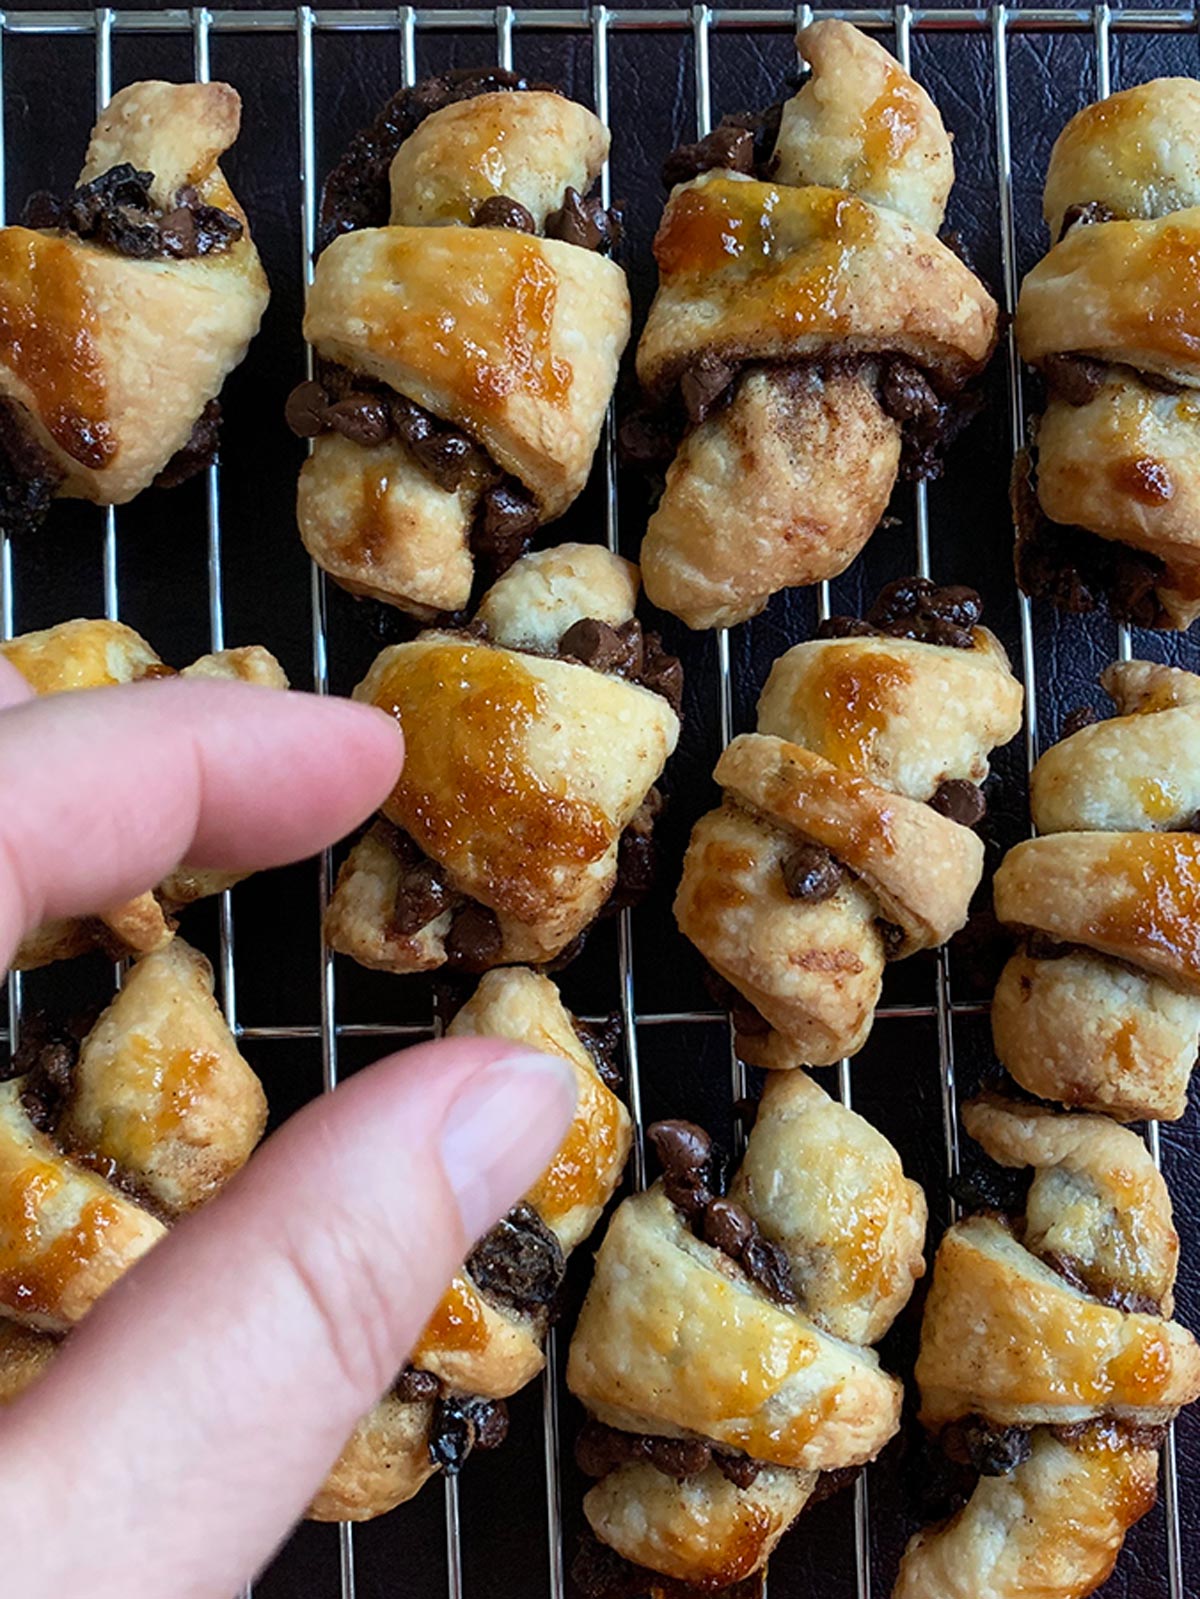 Baked rugelach on cooling rack with a hand reaching for one.